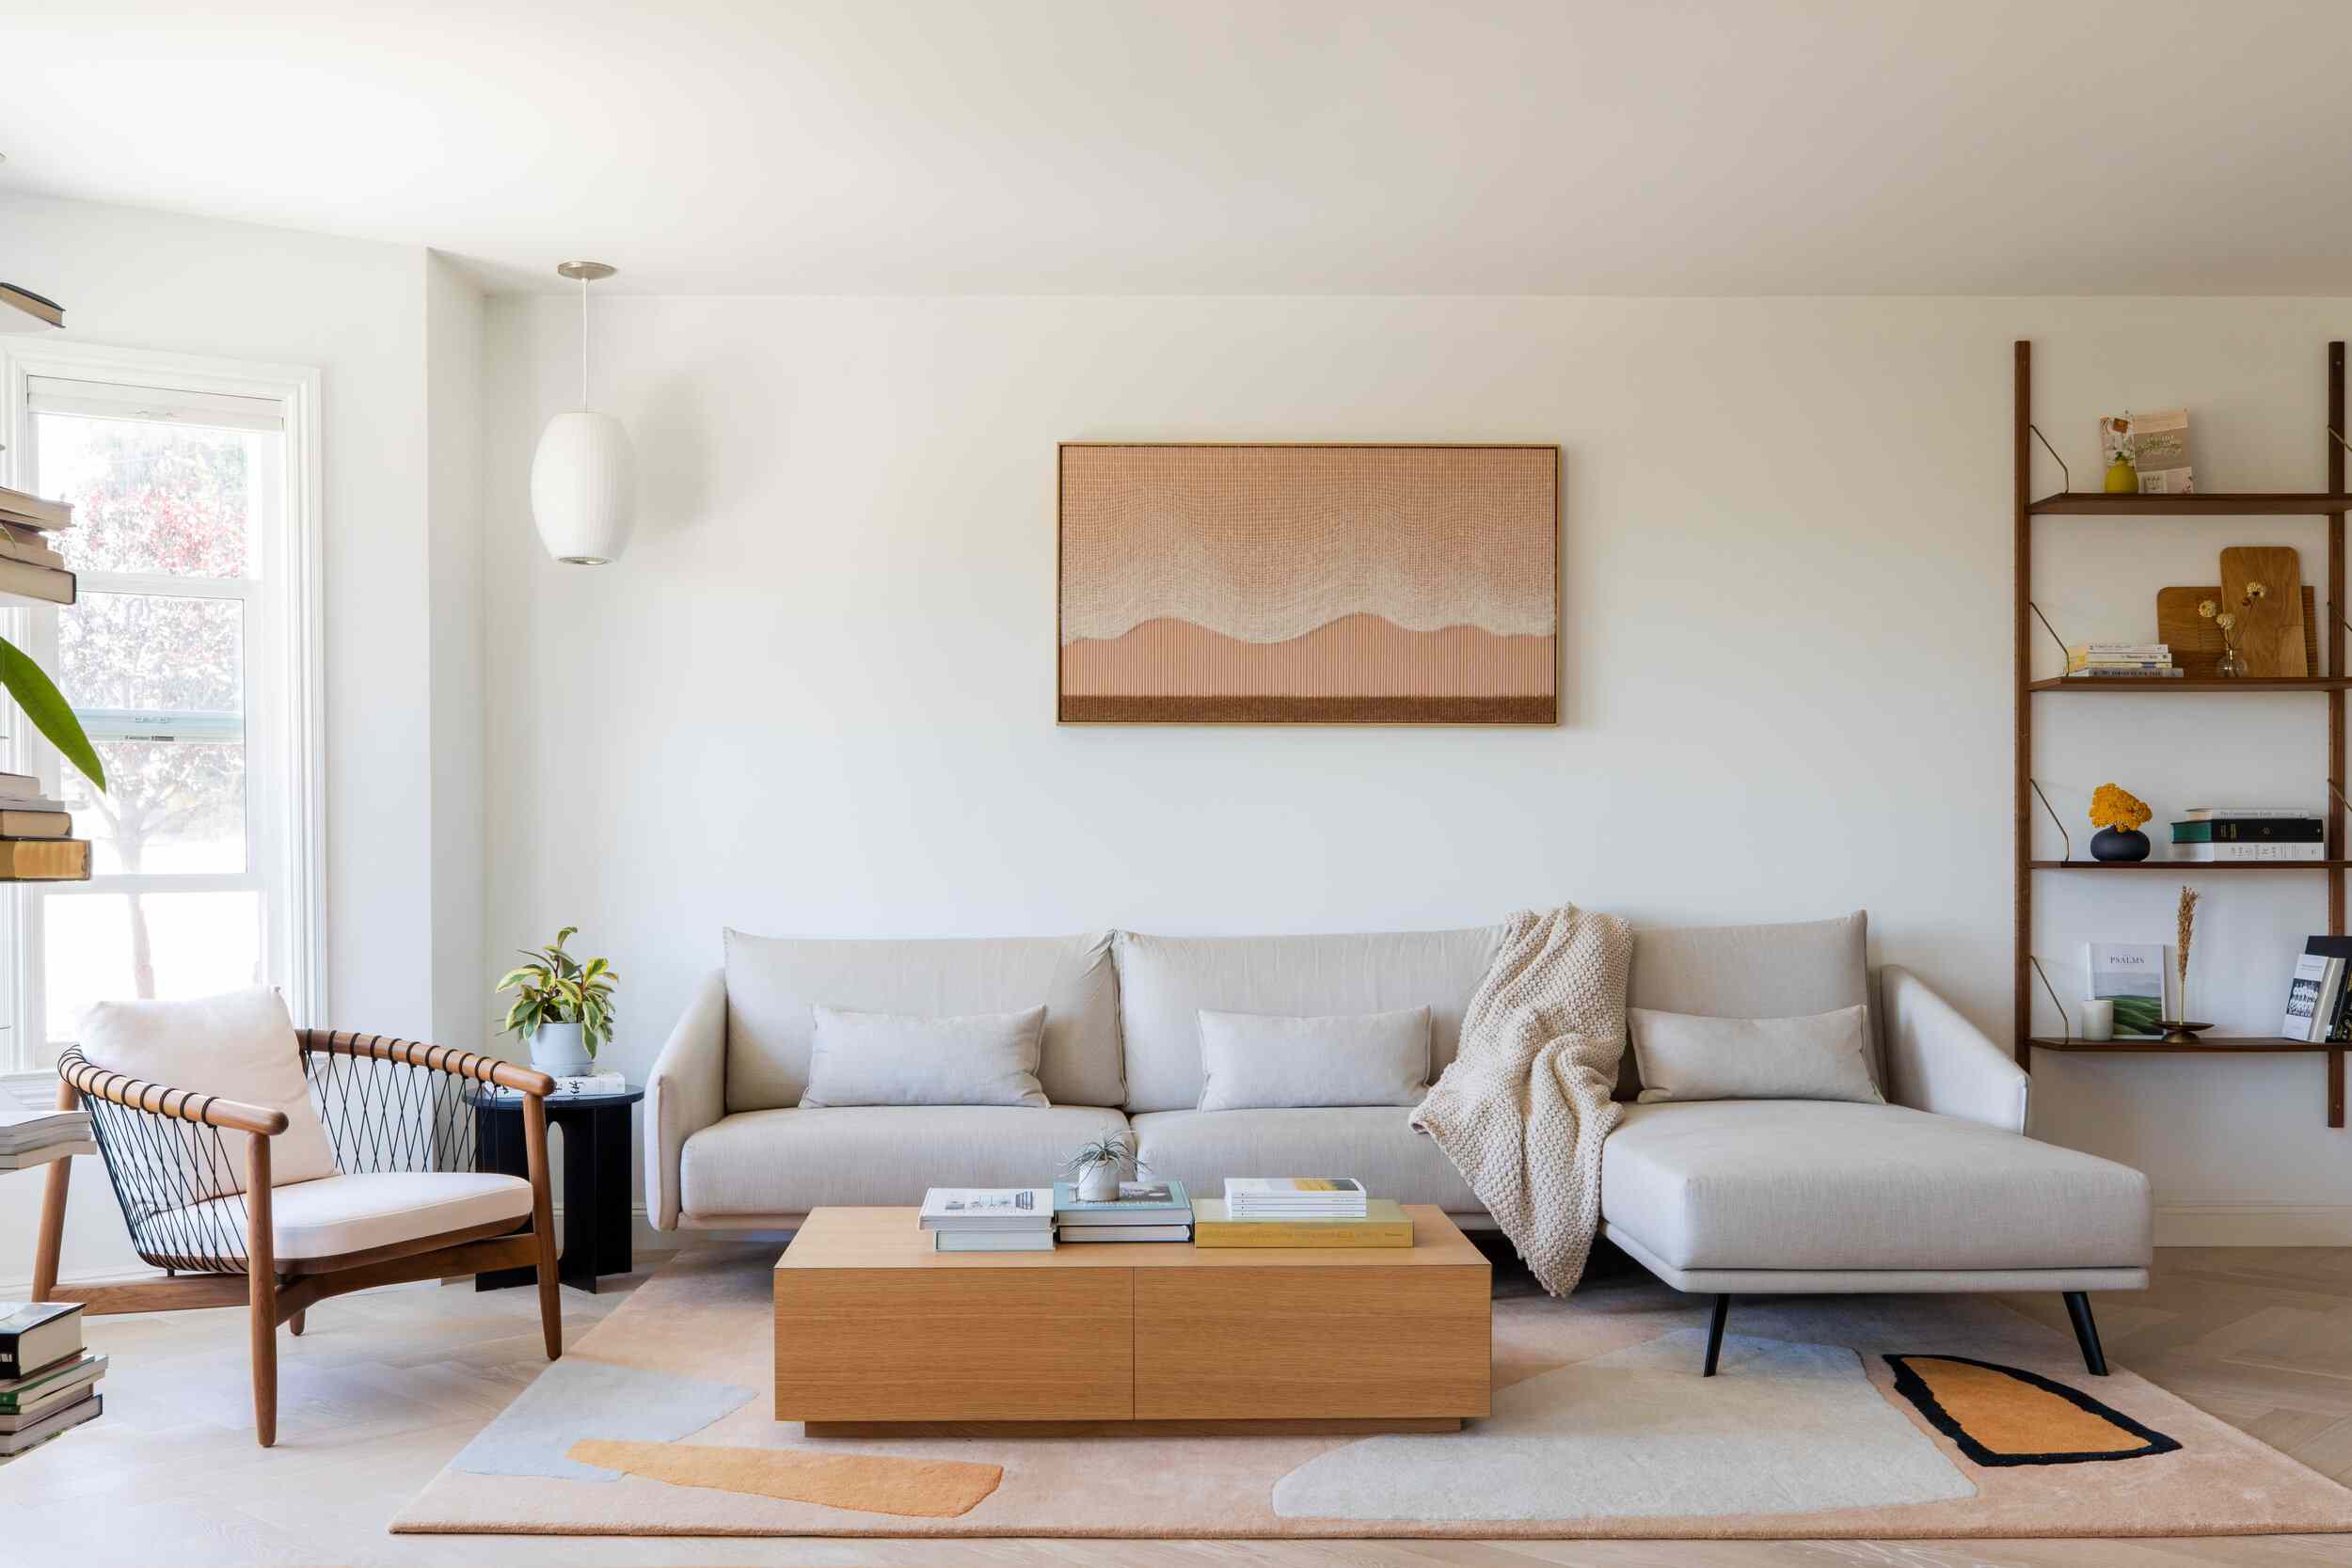 Living room with a minimalist design aesthetic.